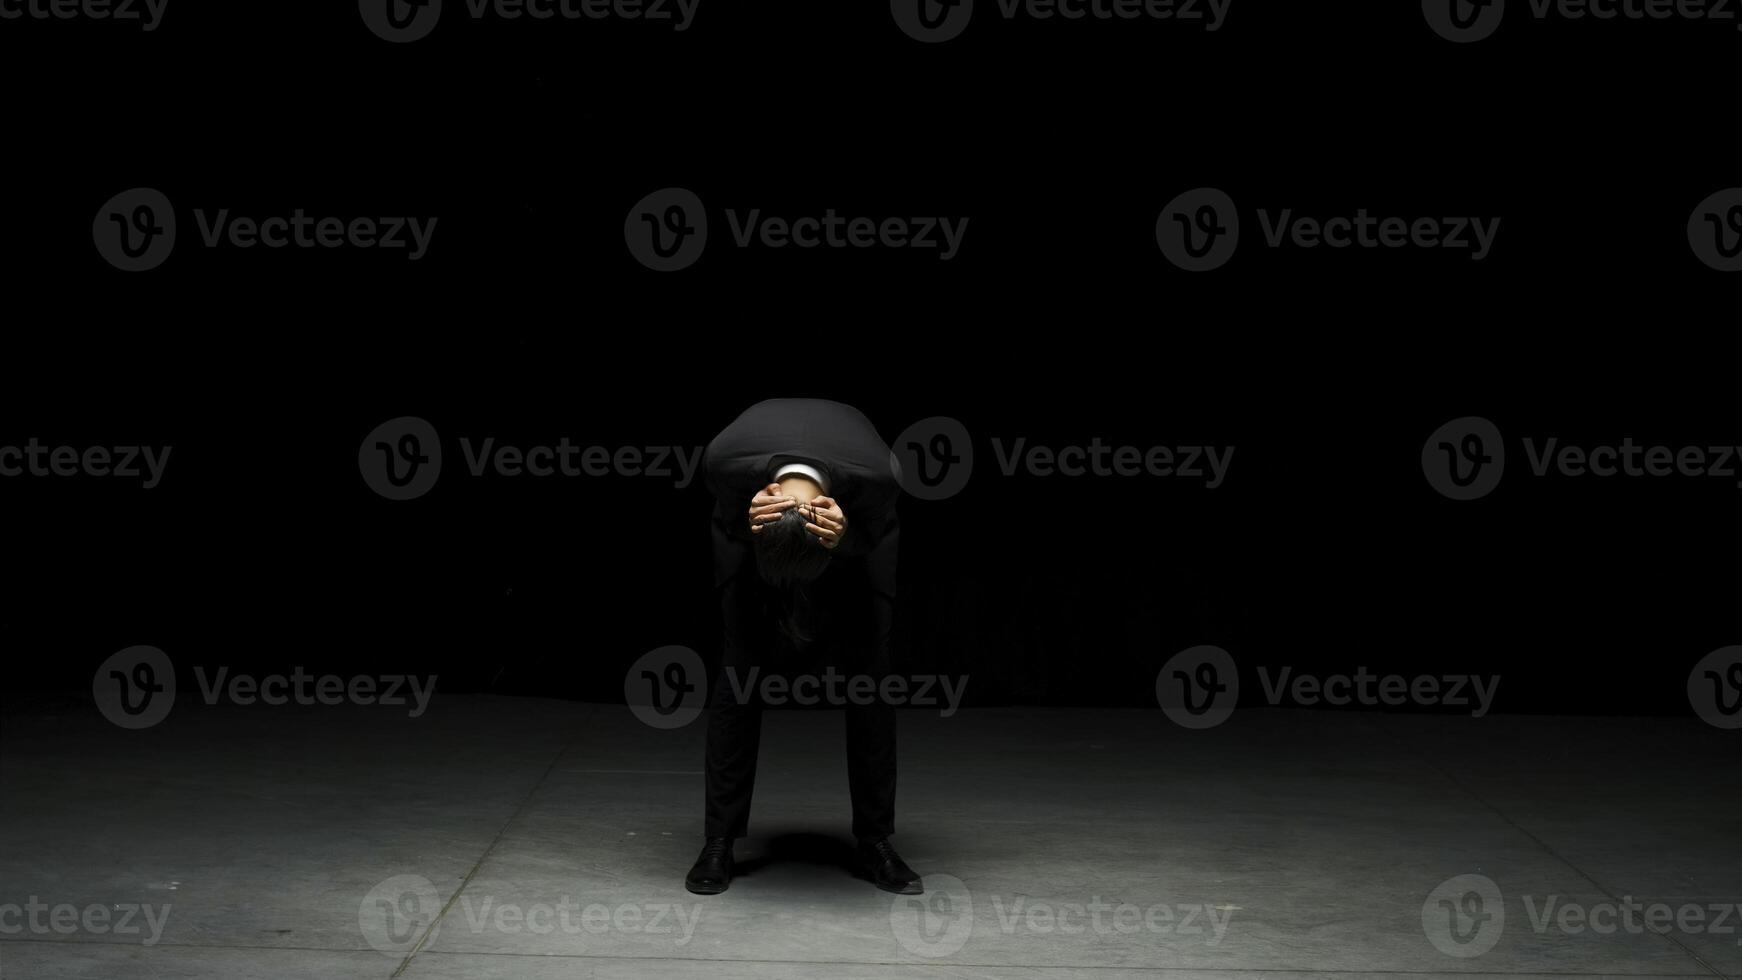 Man in suit stands emotionally on stage. Stock footage. Man in suit stands on stage with dramatic look. Elegant dramatic man on dark stage in emotional production photo